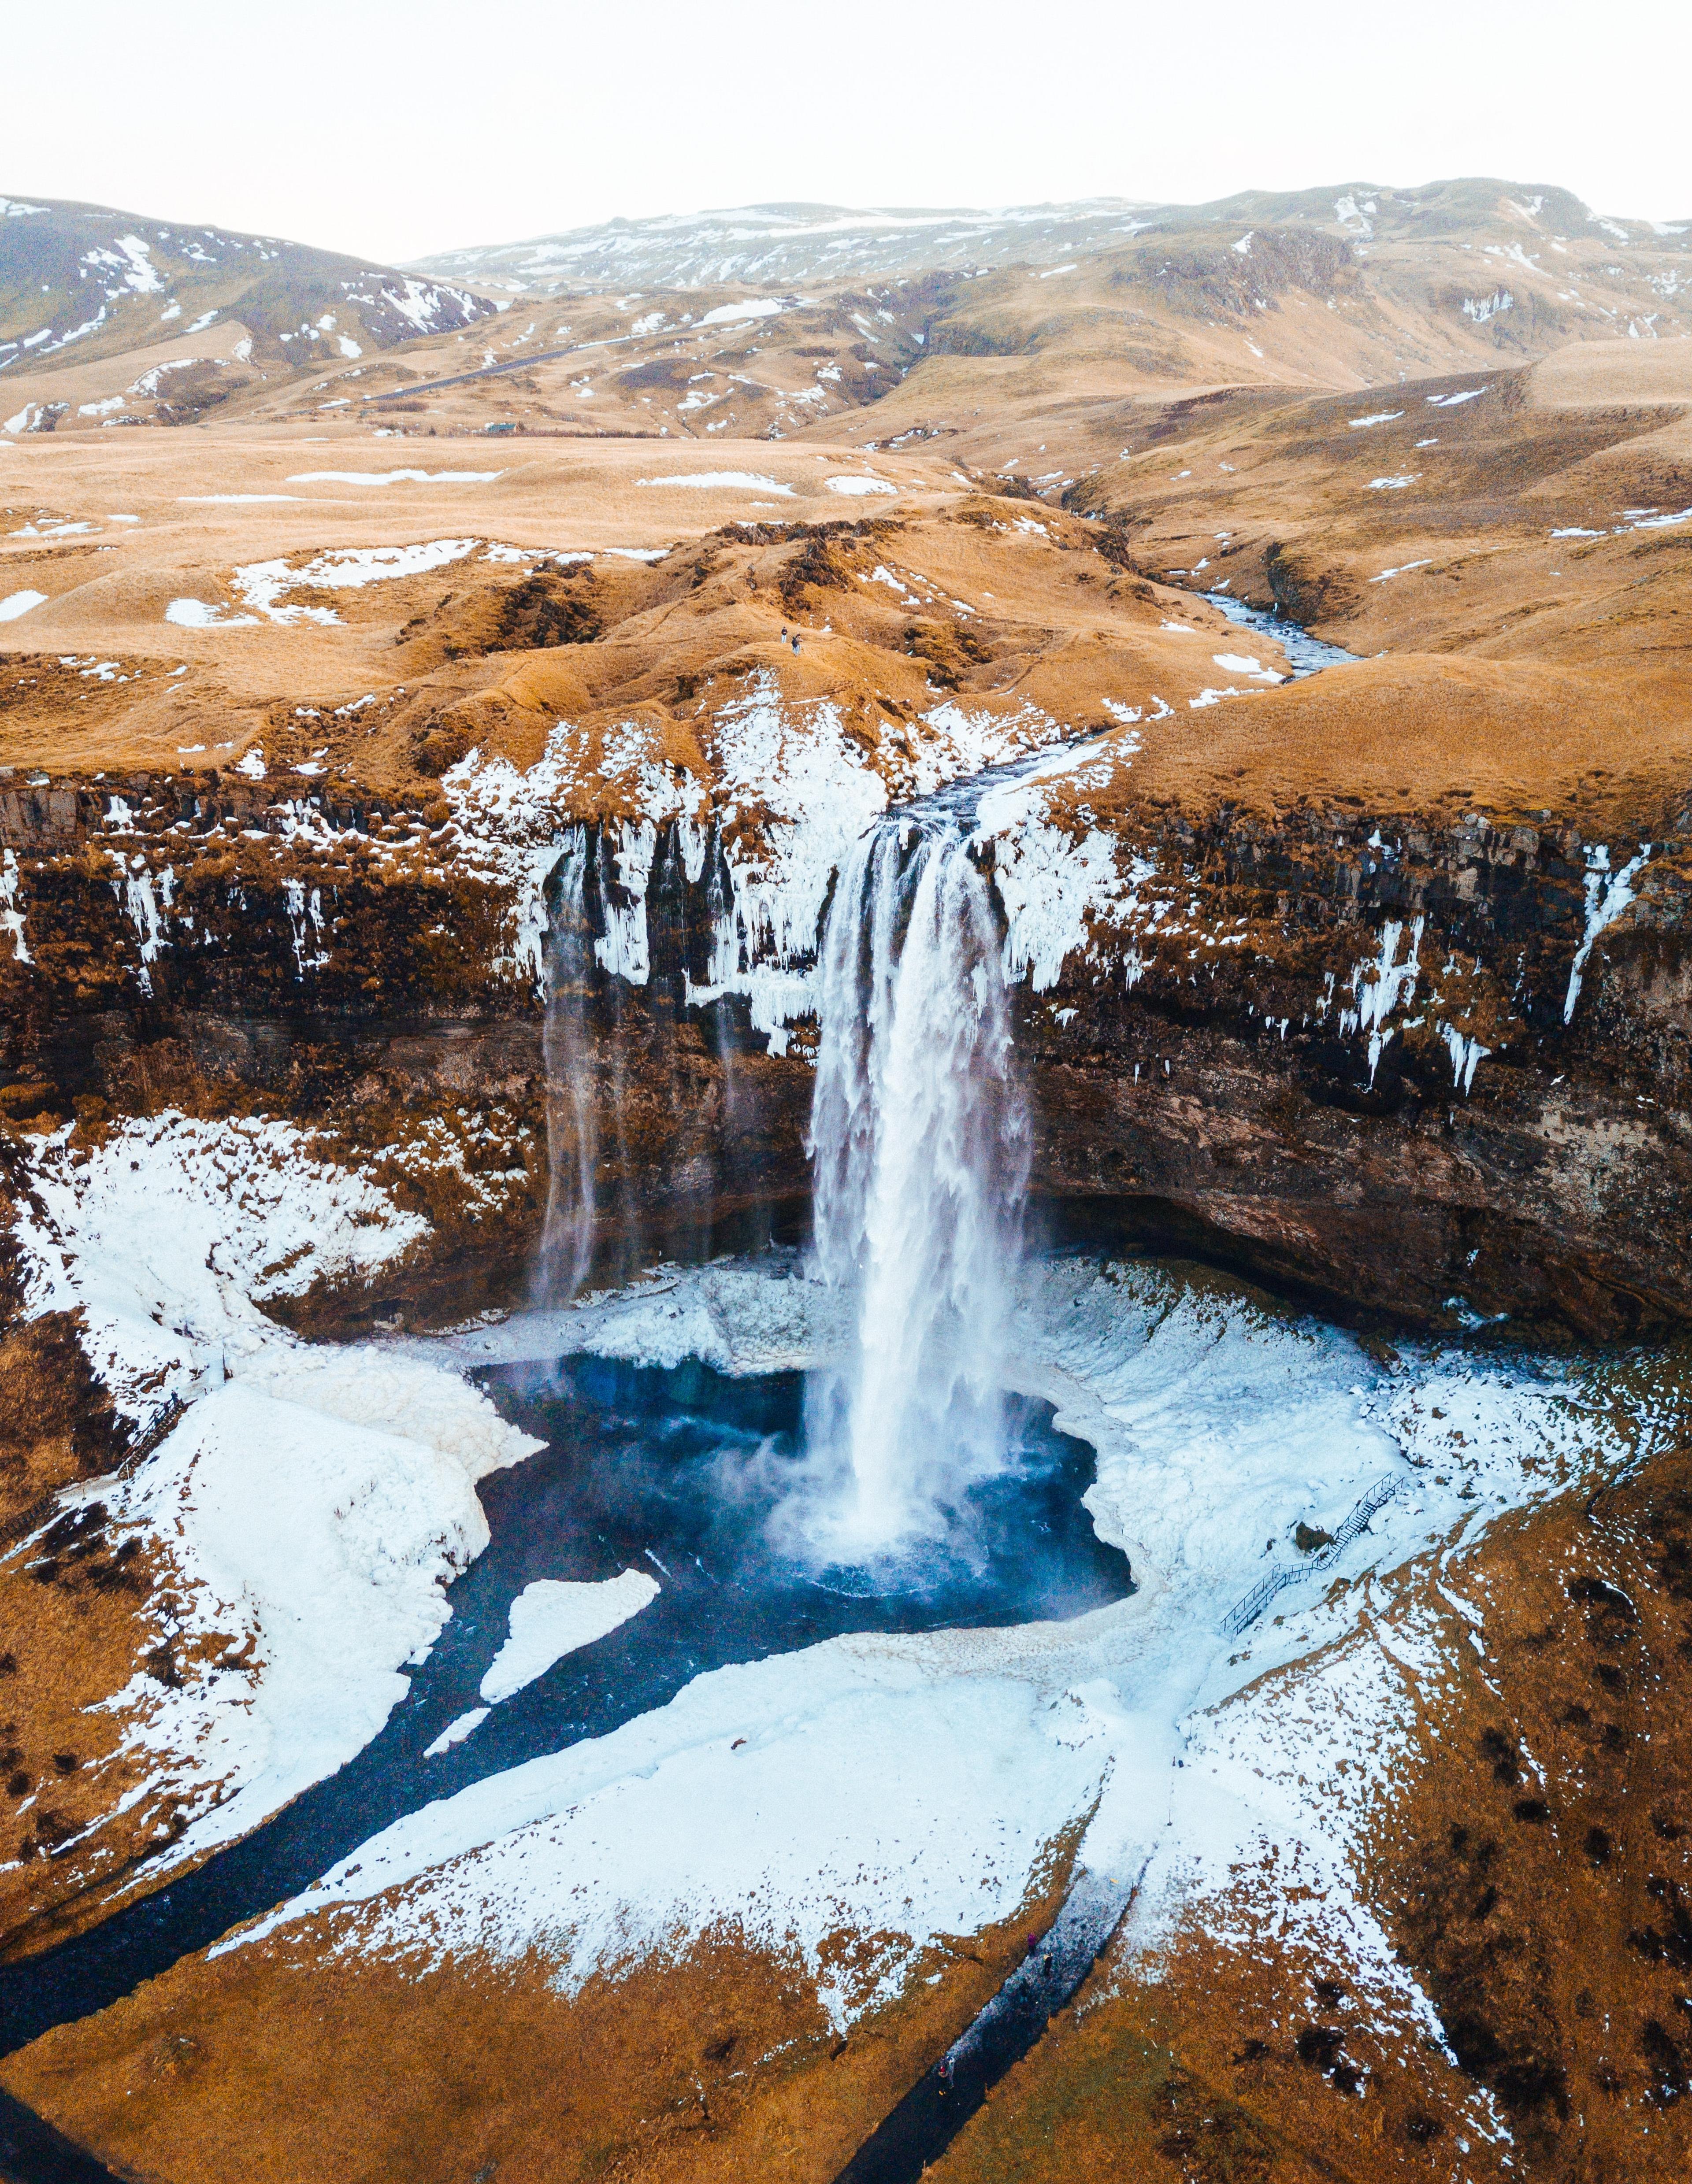 Aerial perspective of Seljalandsfoss waterfall with scattered frozen patches amidst a brown, snow-free landscape.